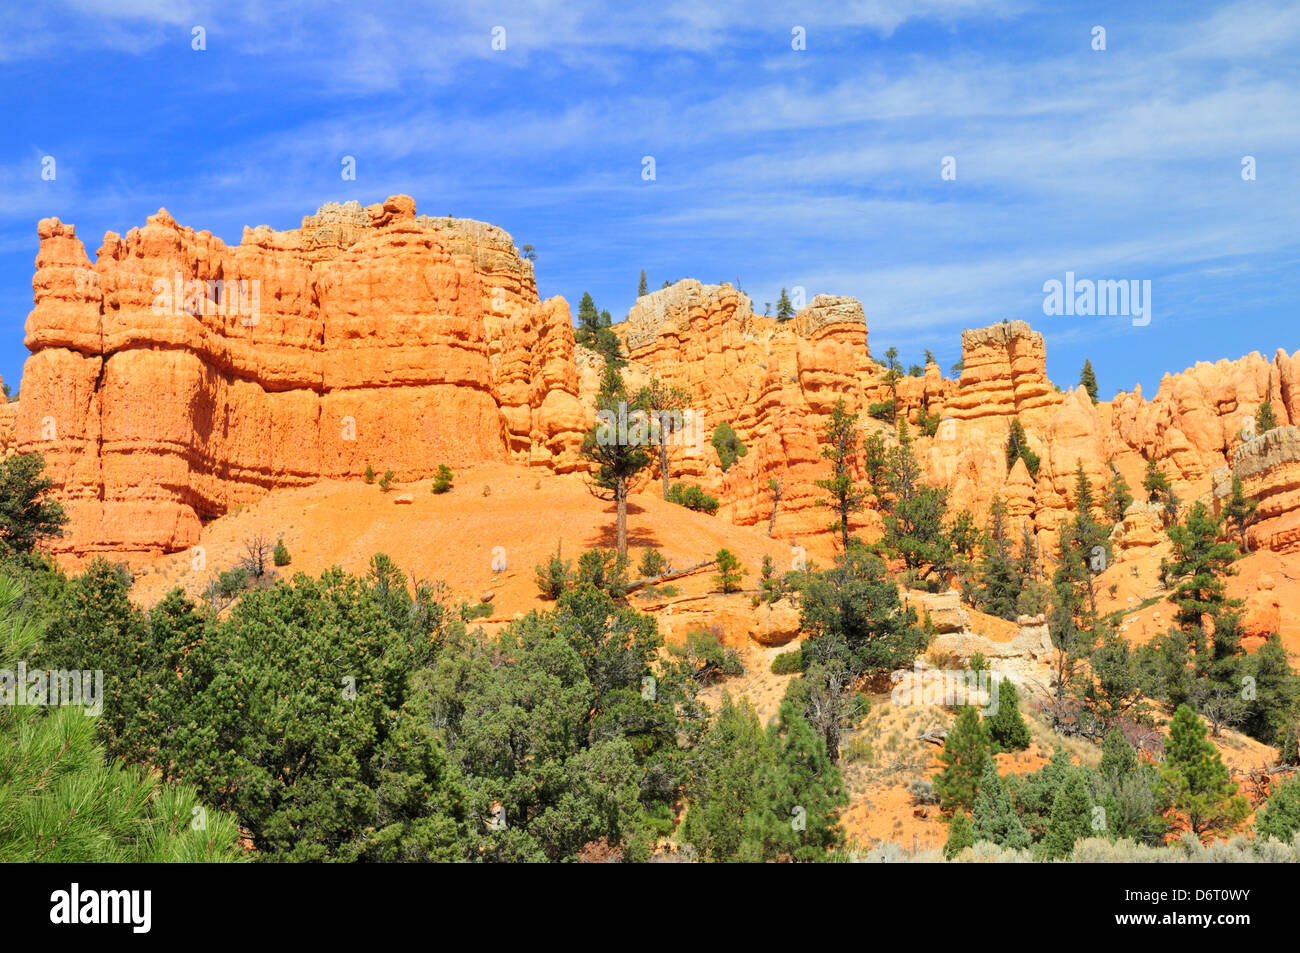 Intricately carved formations in Red Canyon, Utah Stock Photo